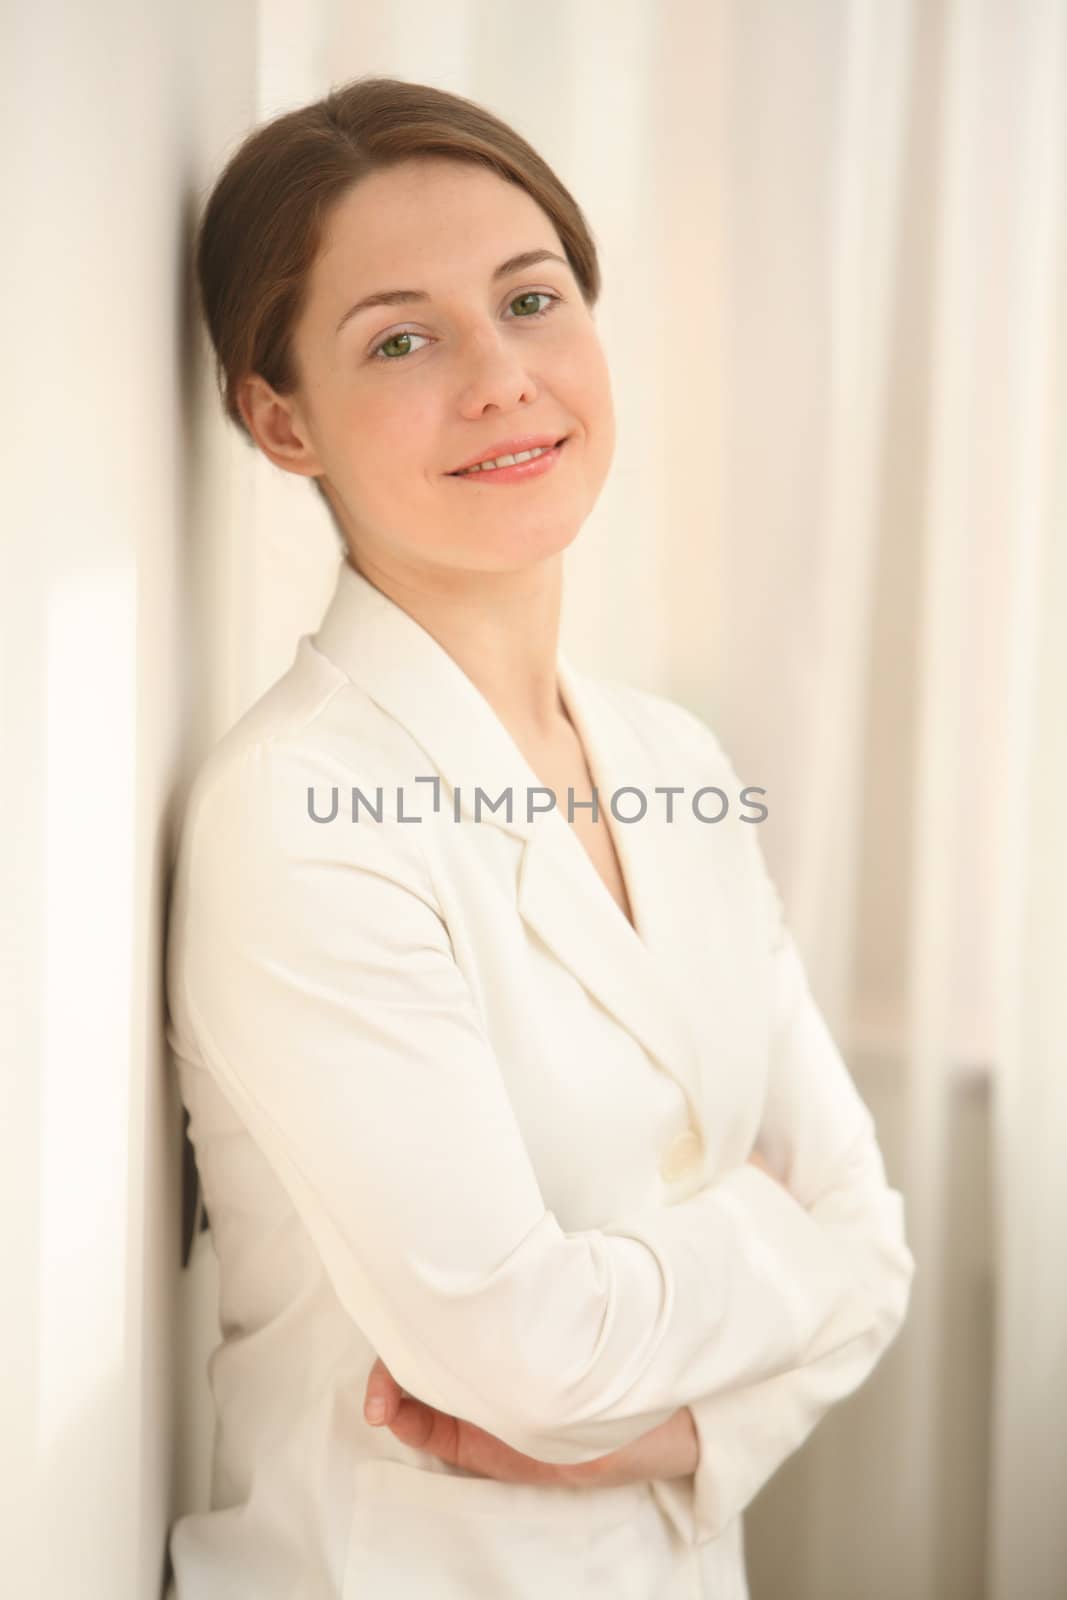 The smiling young woman in a white dressing gown
